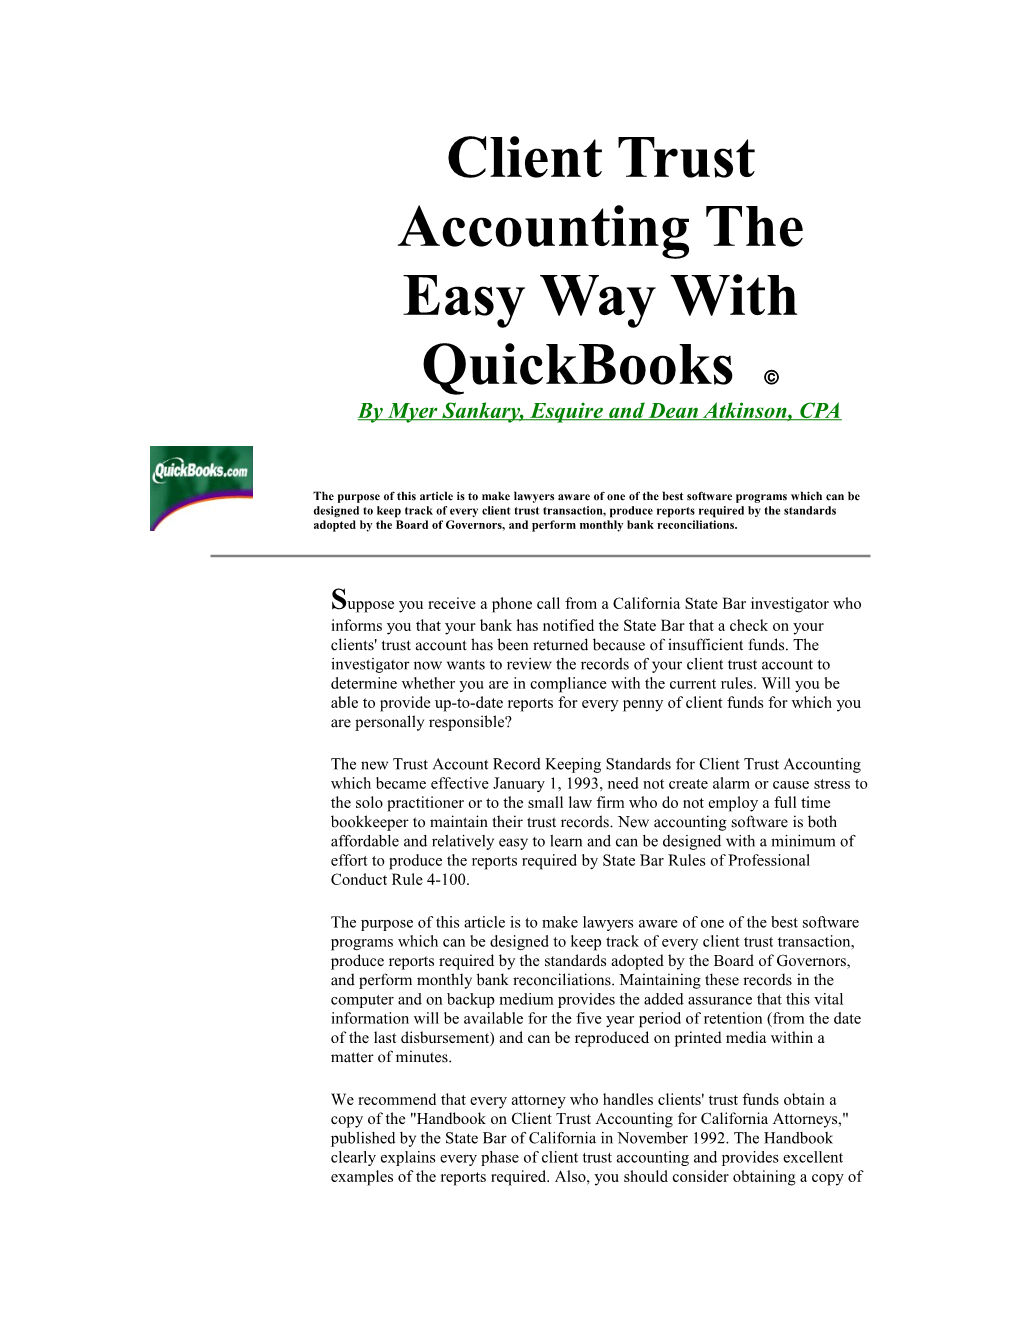 Client Trust Accounting the Easy Way with Quickbooks Ã